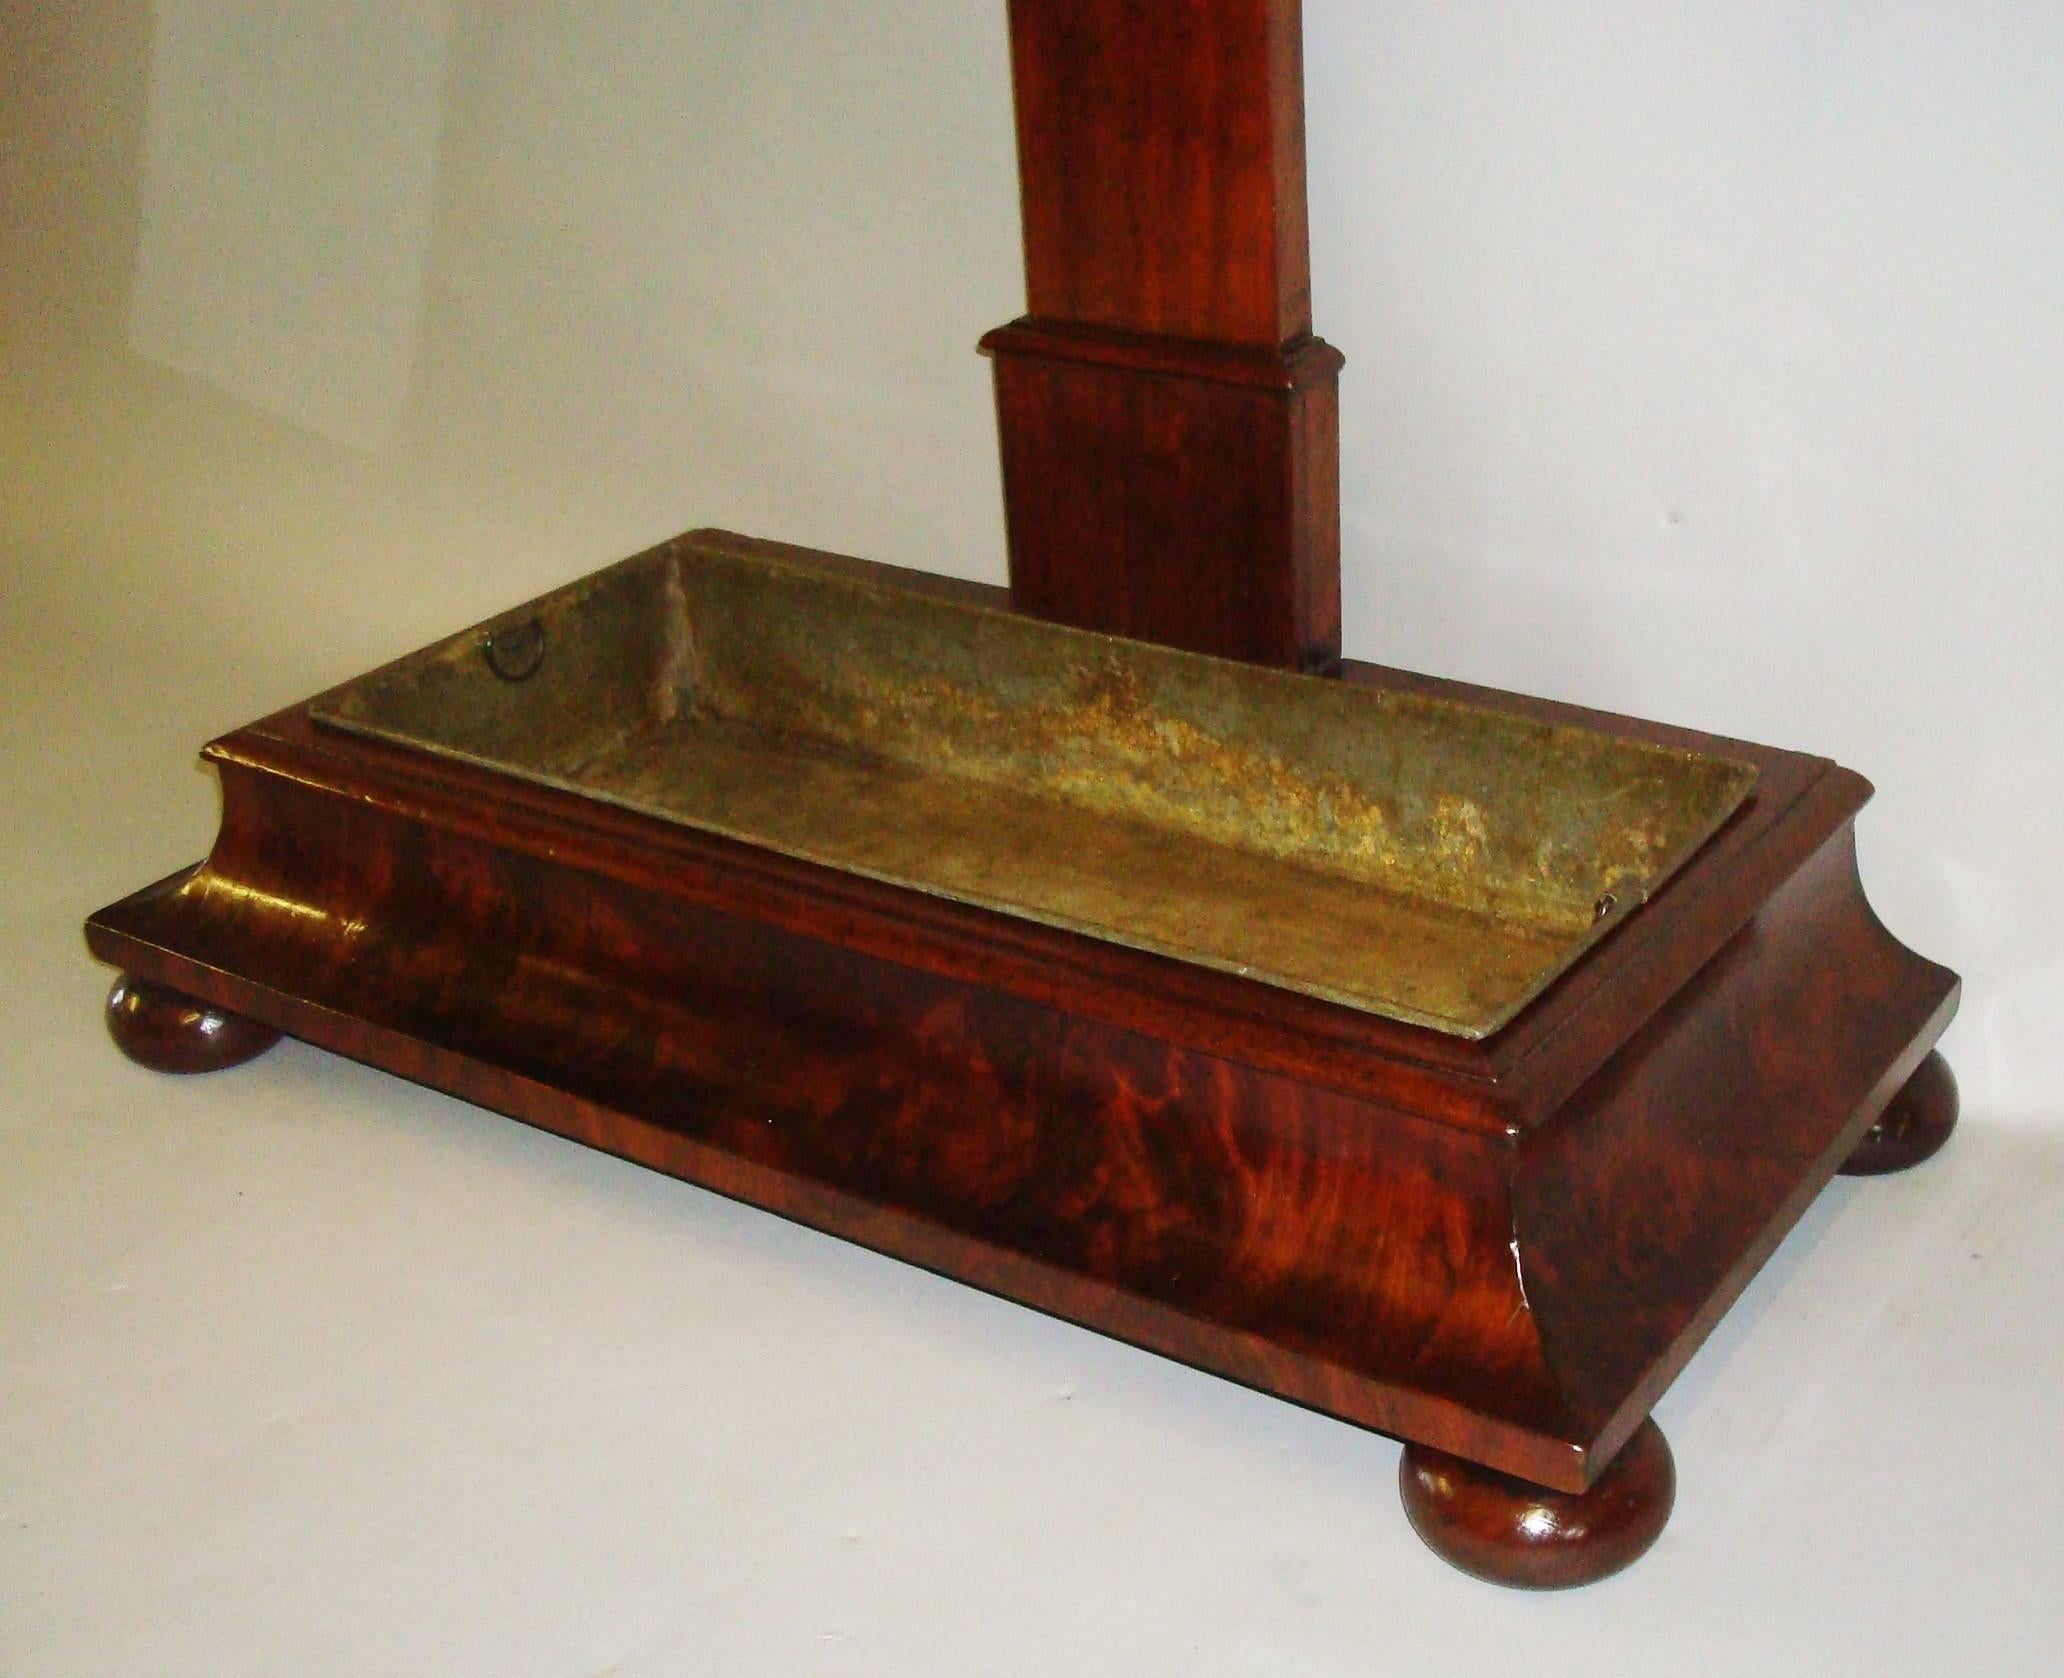 Polished George IV Mahogany 'Tree' Hall Stand of Large Proportions